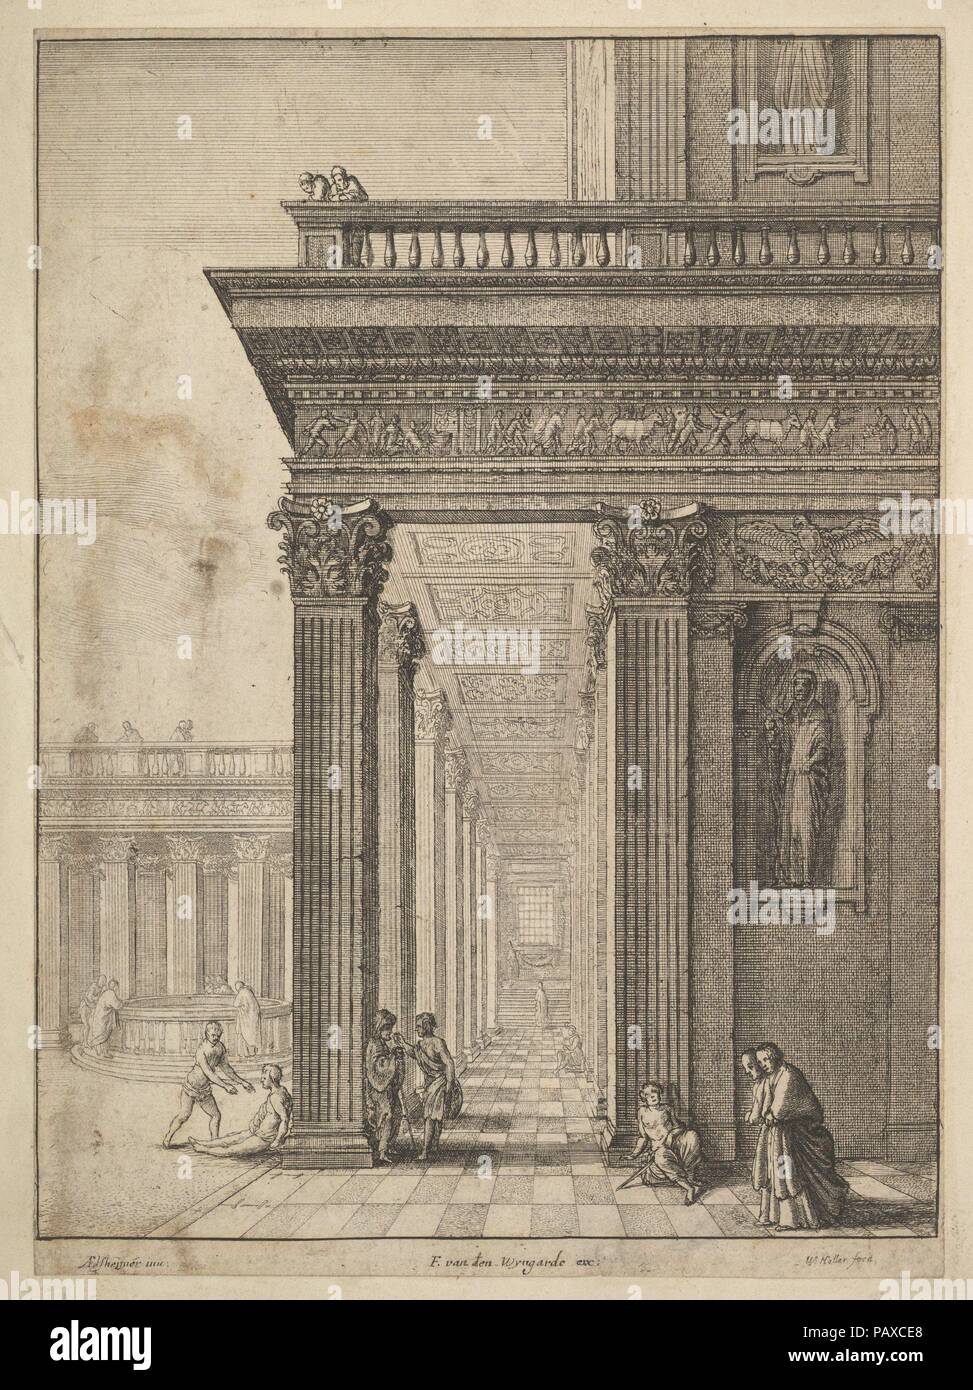 Temple courtyard with figures, after David Teniers the Elder (?). Artist: after Adam Elsheimer (German, Frankfurt 1578-1610 Rome). Dimensions: Sheet: 8 7/8 × 6 7/16 in. (22.5 × 16.4 cm). Etcher: Wenceslaus Hollar (Bohemian, Prague 1607-1677 London). Date: 1625-77.  Temple colonnade and courtyard, with walking, seated and conversing figures, some looking down a well at left. Museum: Metropolitan Museum of Art, New York, USA. Stock Photo